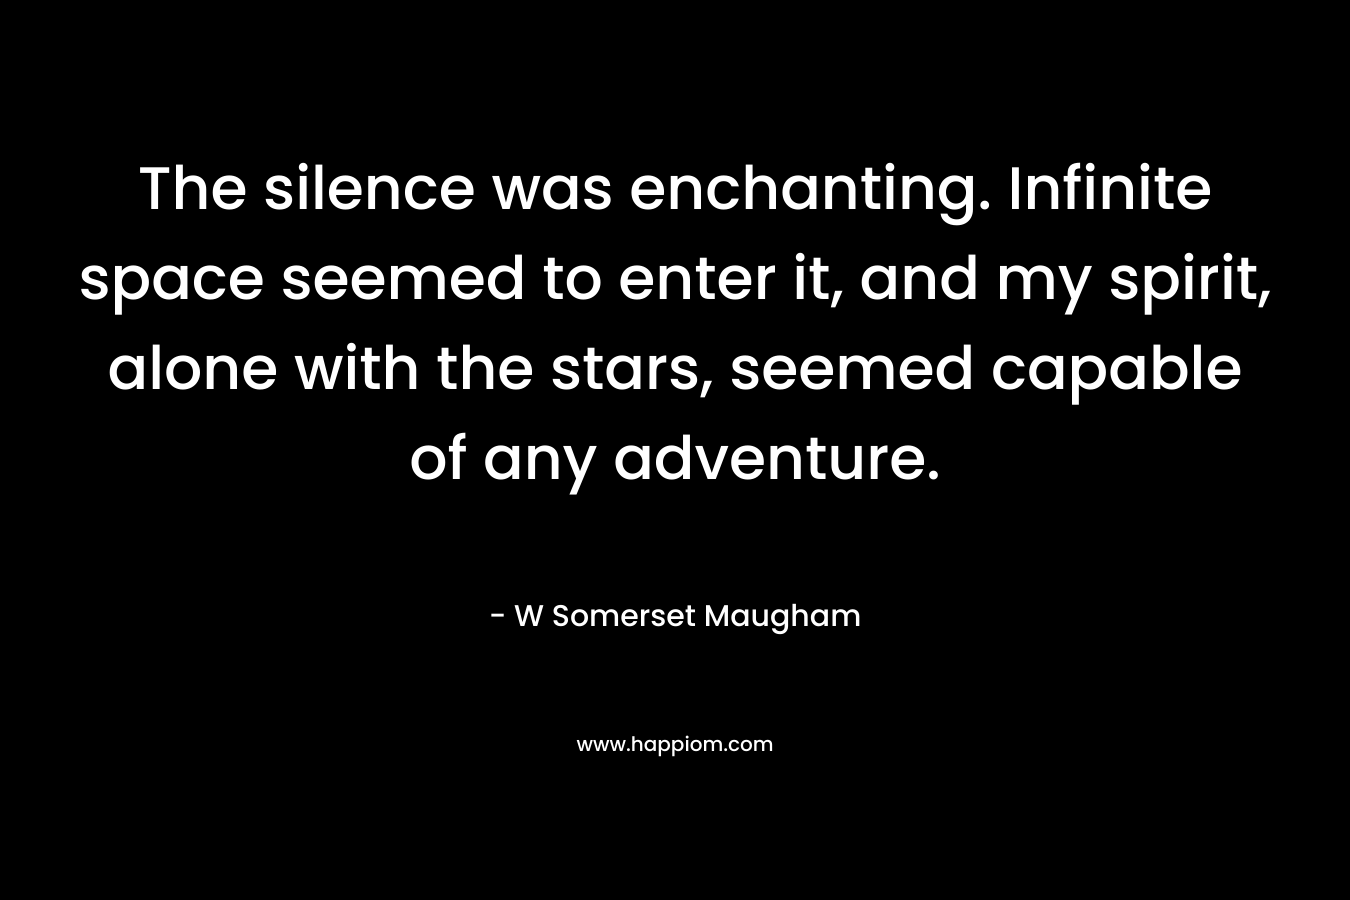 The silence was enchanting. Infinite space seemed to enter it, and my spirit, alone with the stars, seemed capable of any adventure. – W Somerset Maugham